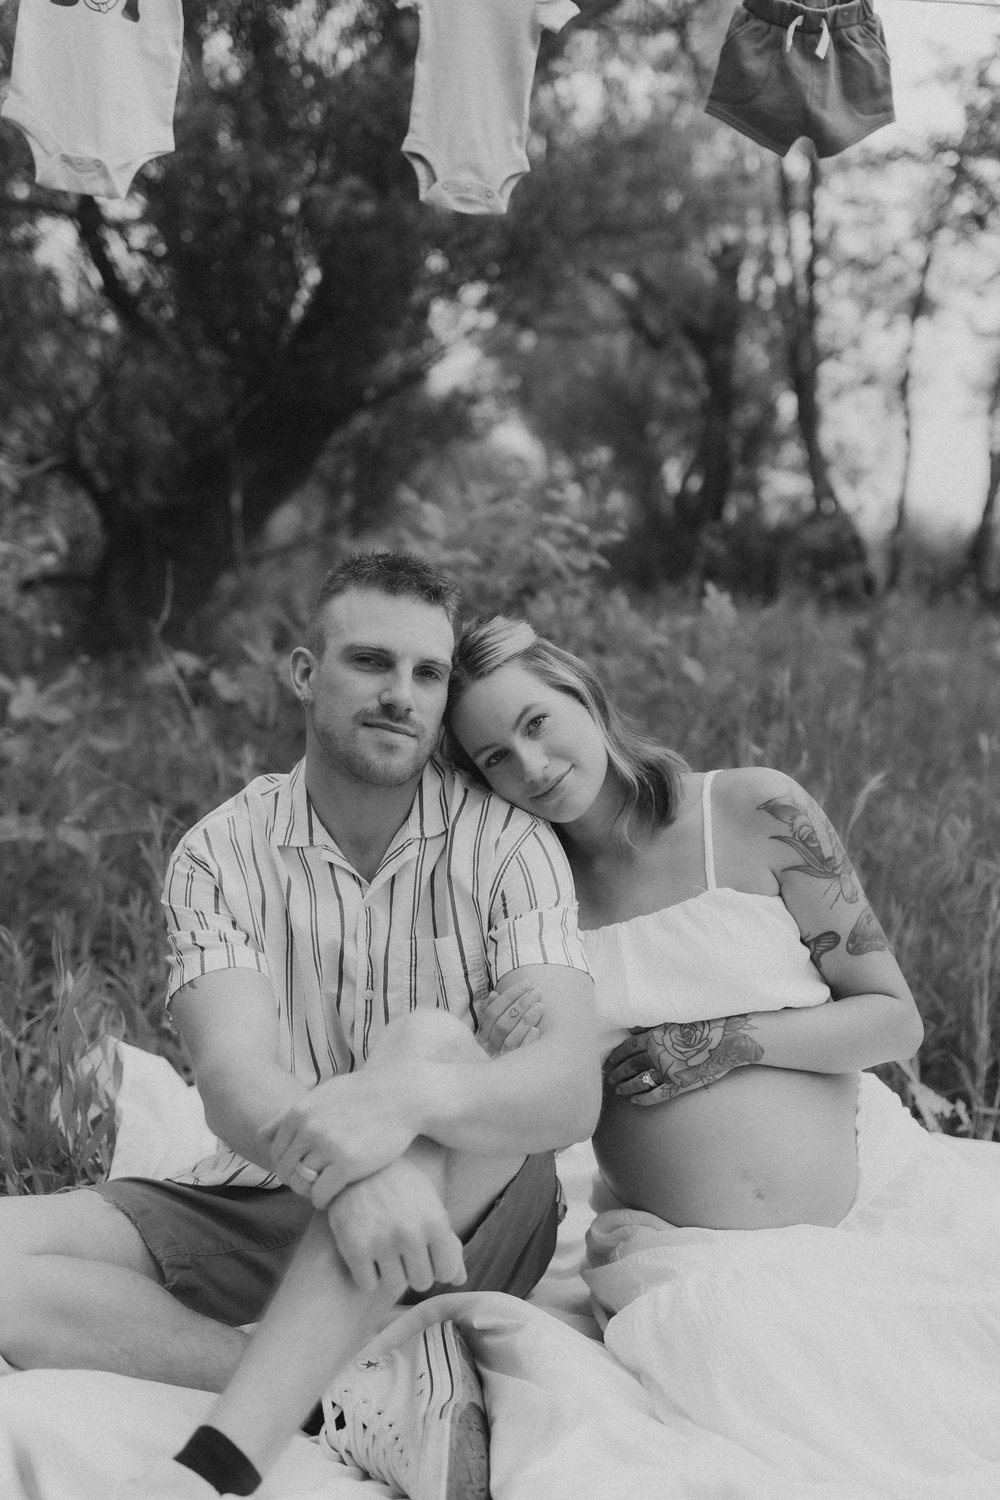  a maternity shoot photographer captures a sweet portrait of an expectant couple on a blanket in a field  